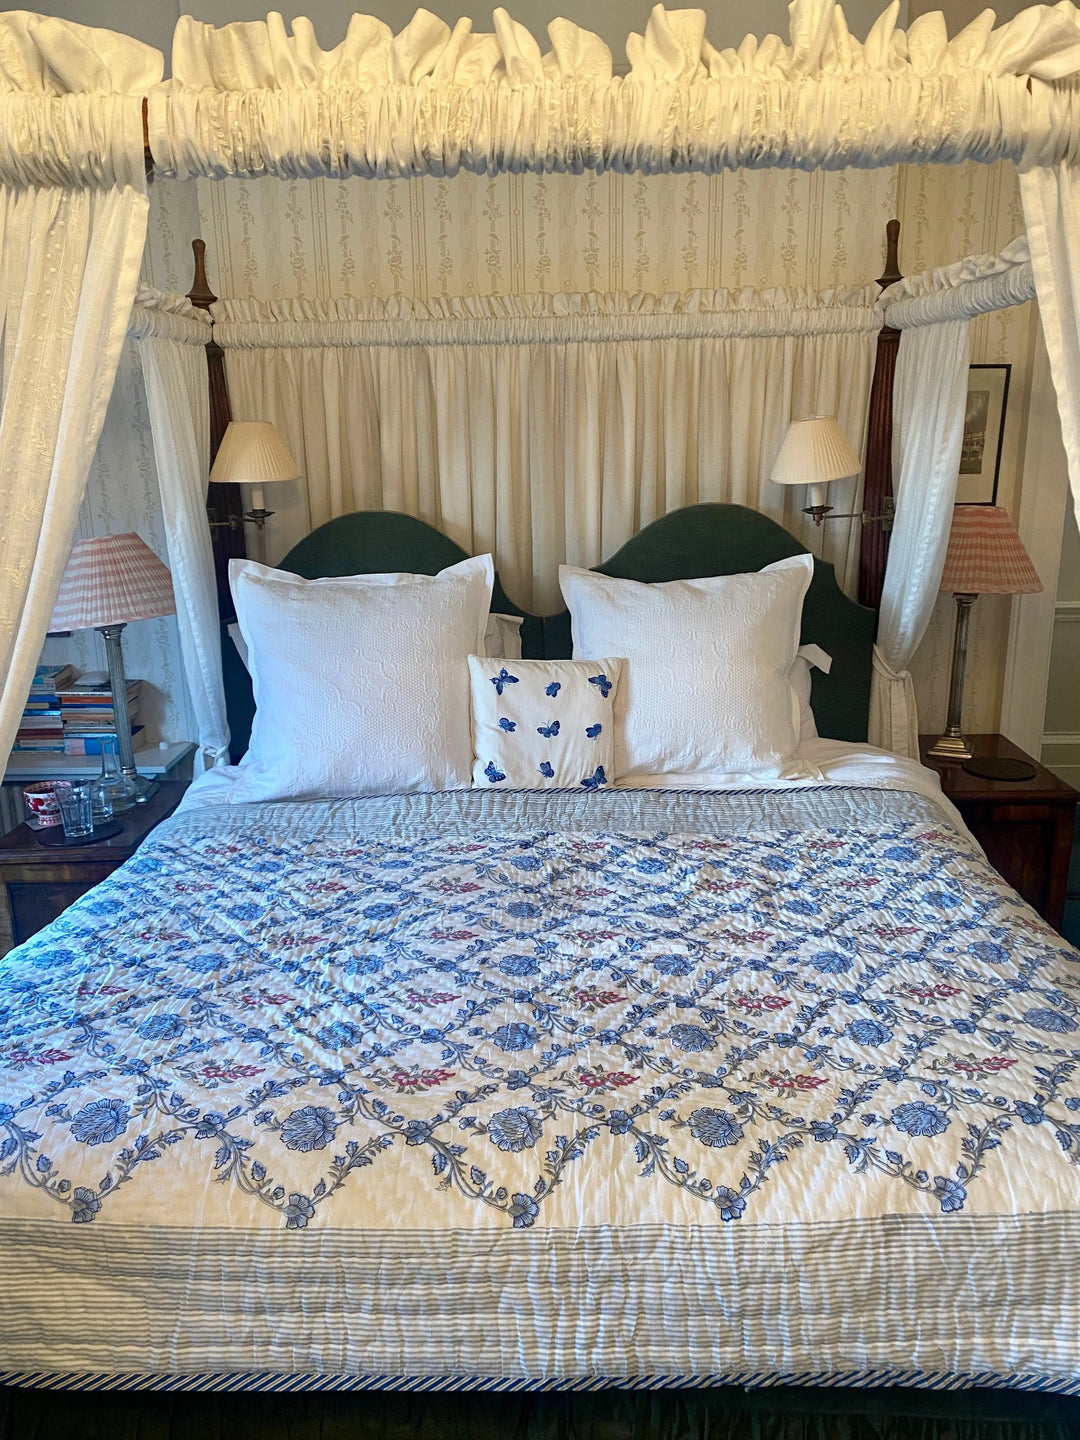 Our beautiful reversible  bedspreads can be used as a decorative top layer to give a cosy finish in cooler weather, or are perfect when it's too warm for a full duvet, when we use them with a sheet between ourselves and the bedspread - it is gorgeous!